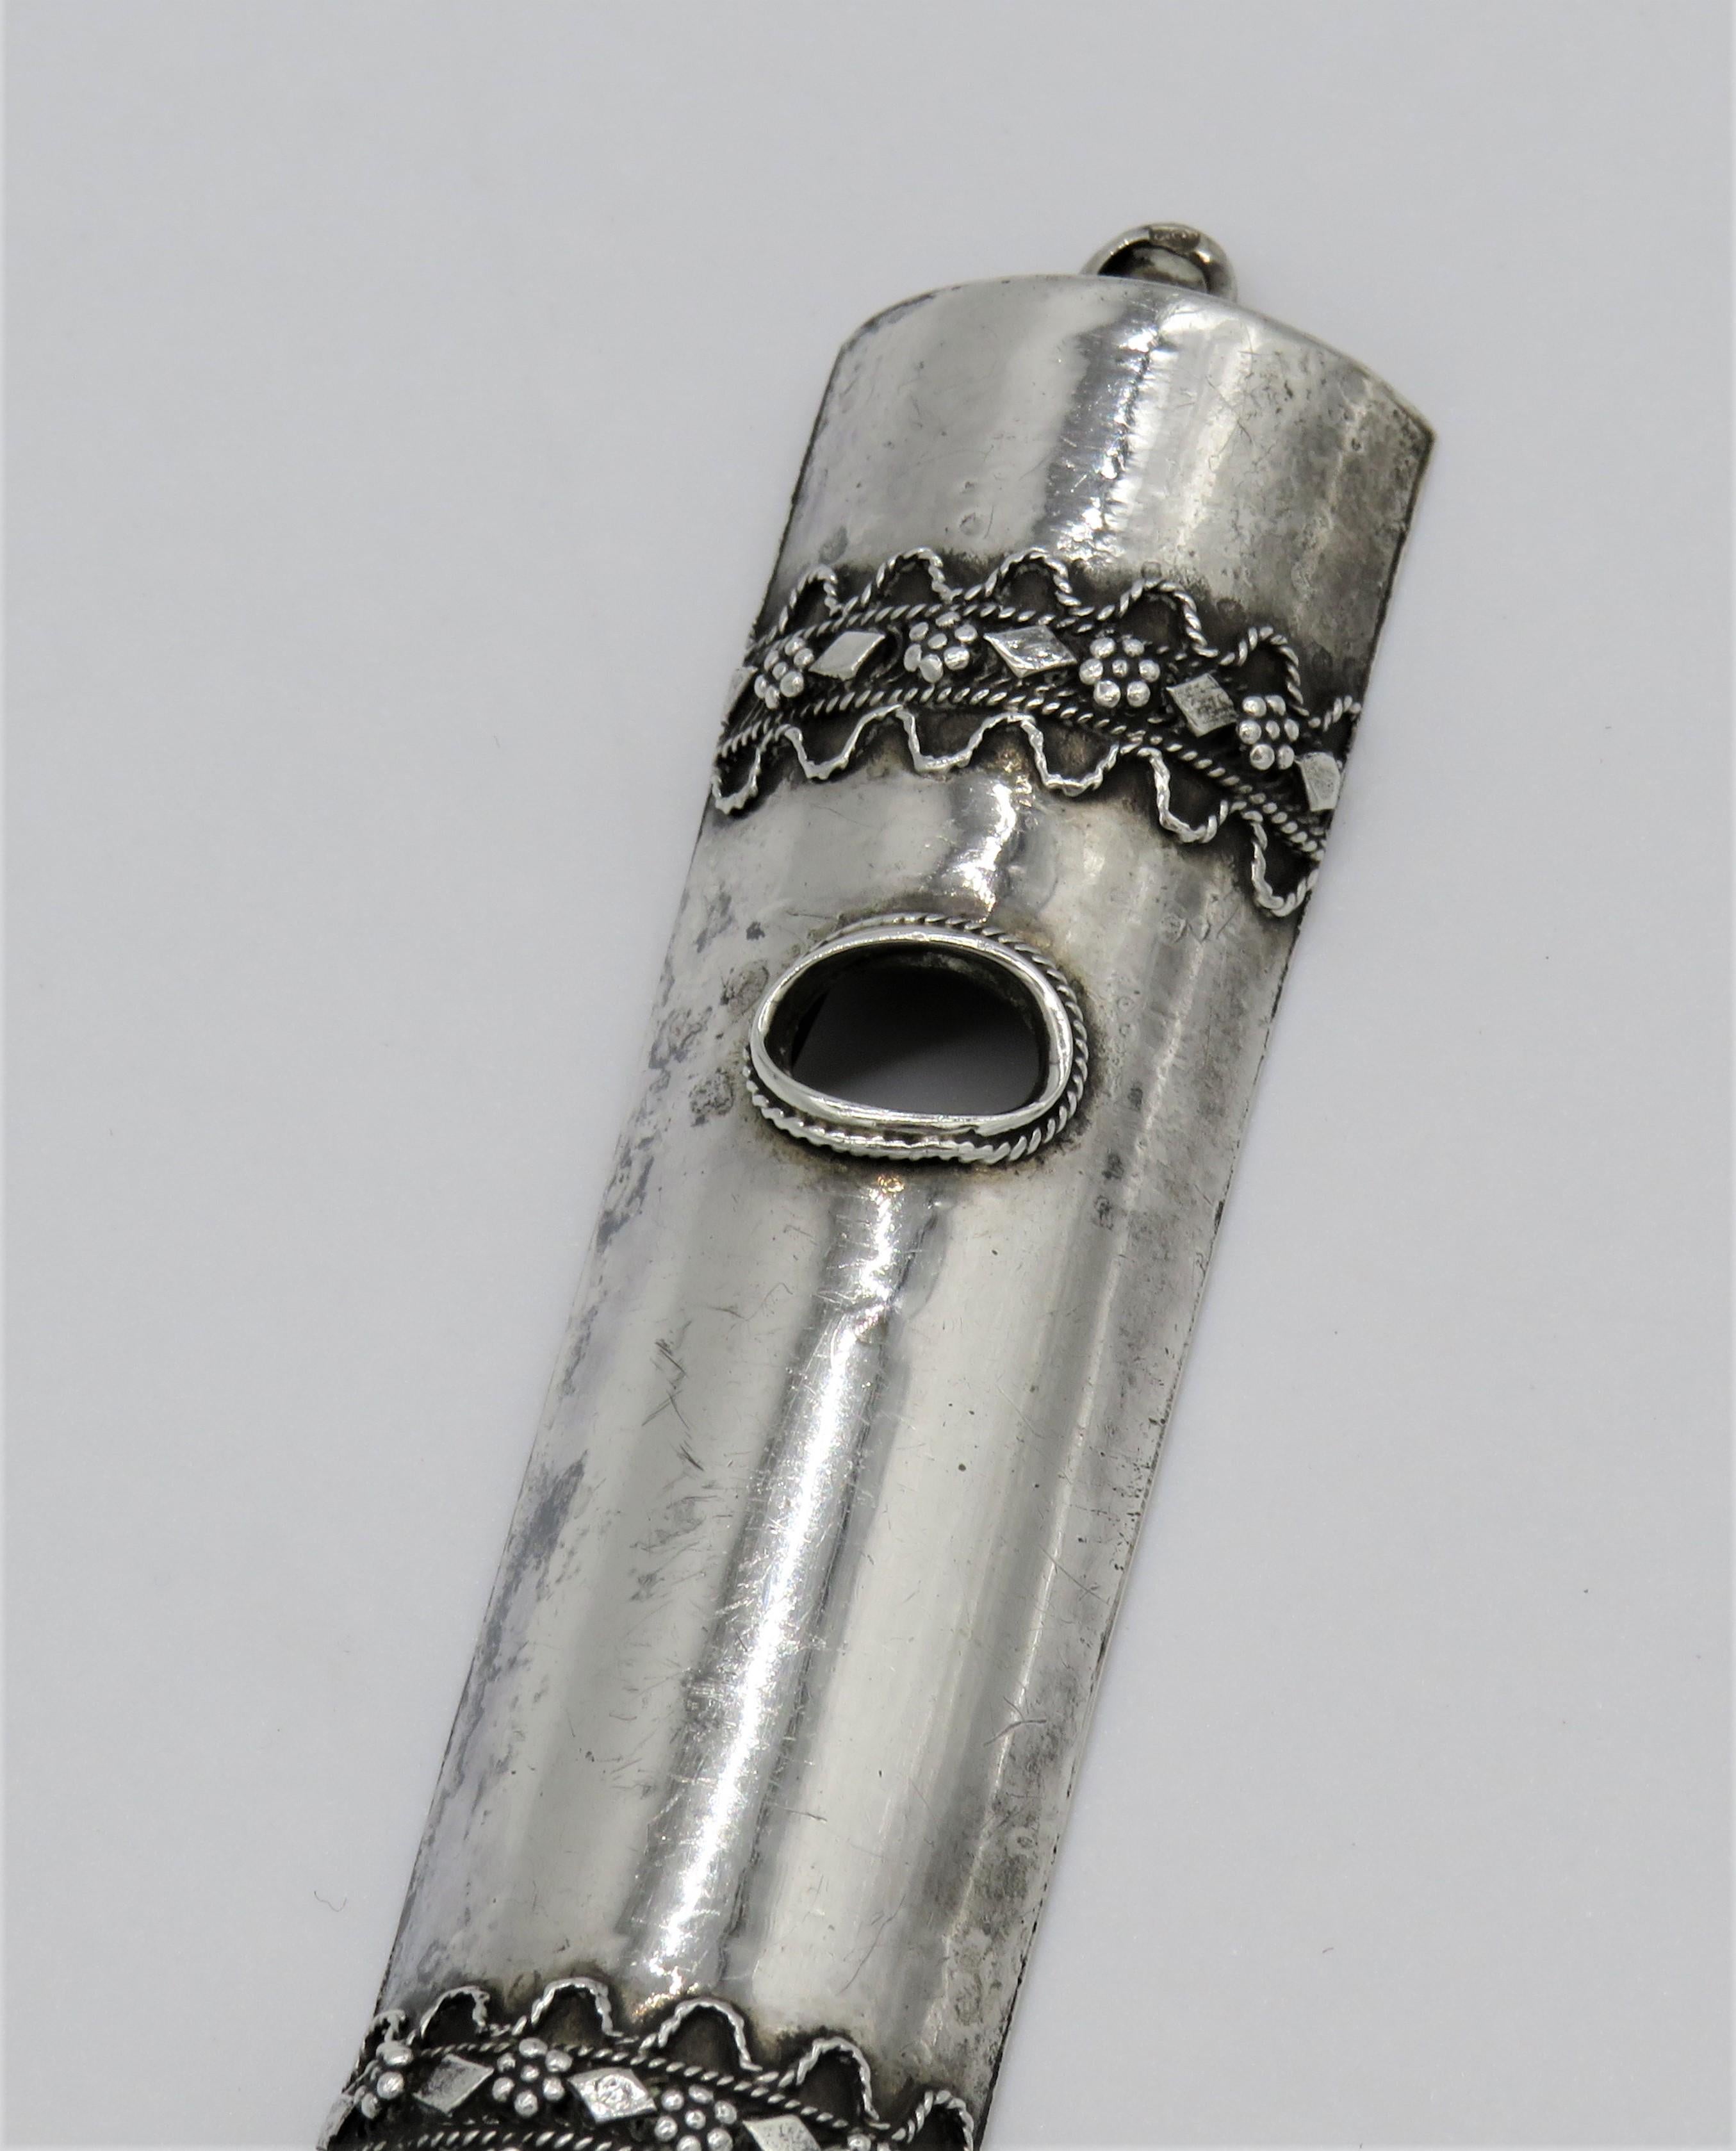 Fine silver and silver filigree Mezuzah, Israel, circa 1950.
The upper section decorated with a silver filigree, and with window that allow to see the parchment inside, the bottom section decorated with the same design as the upper section.
Marked